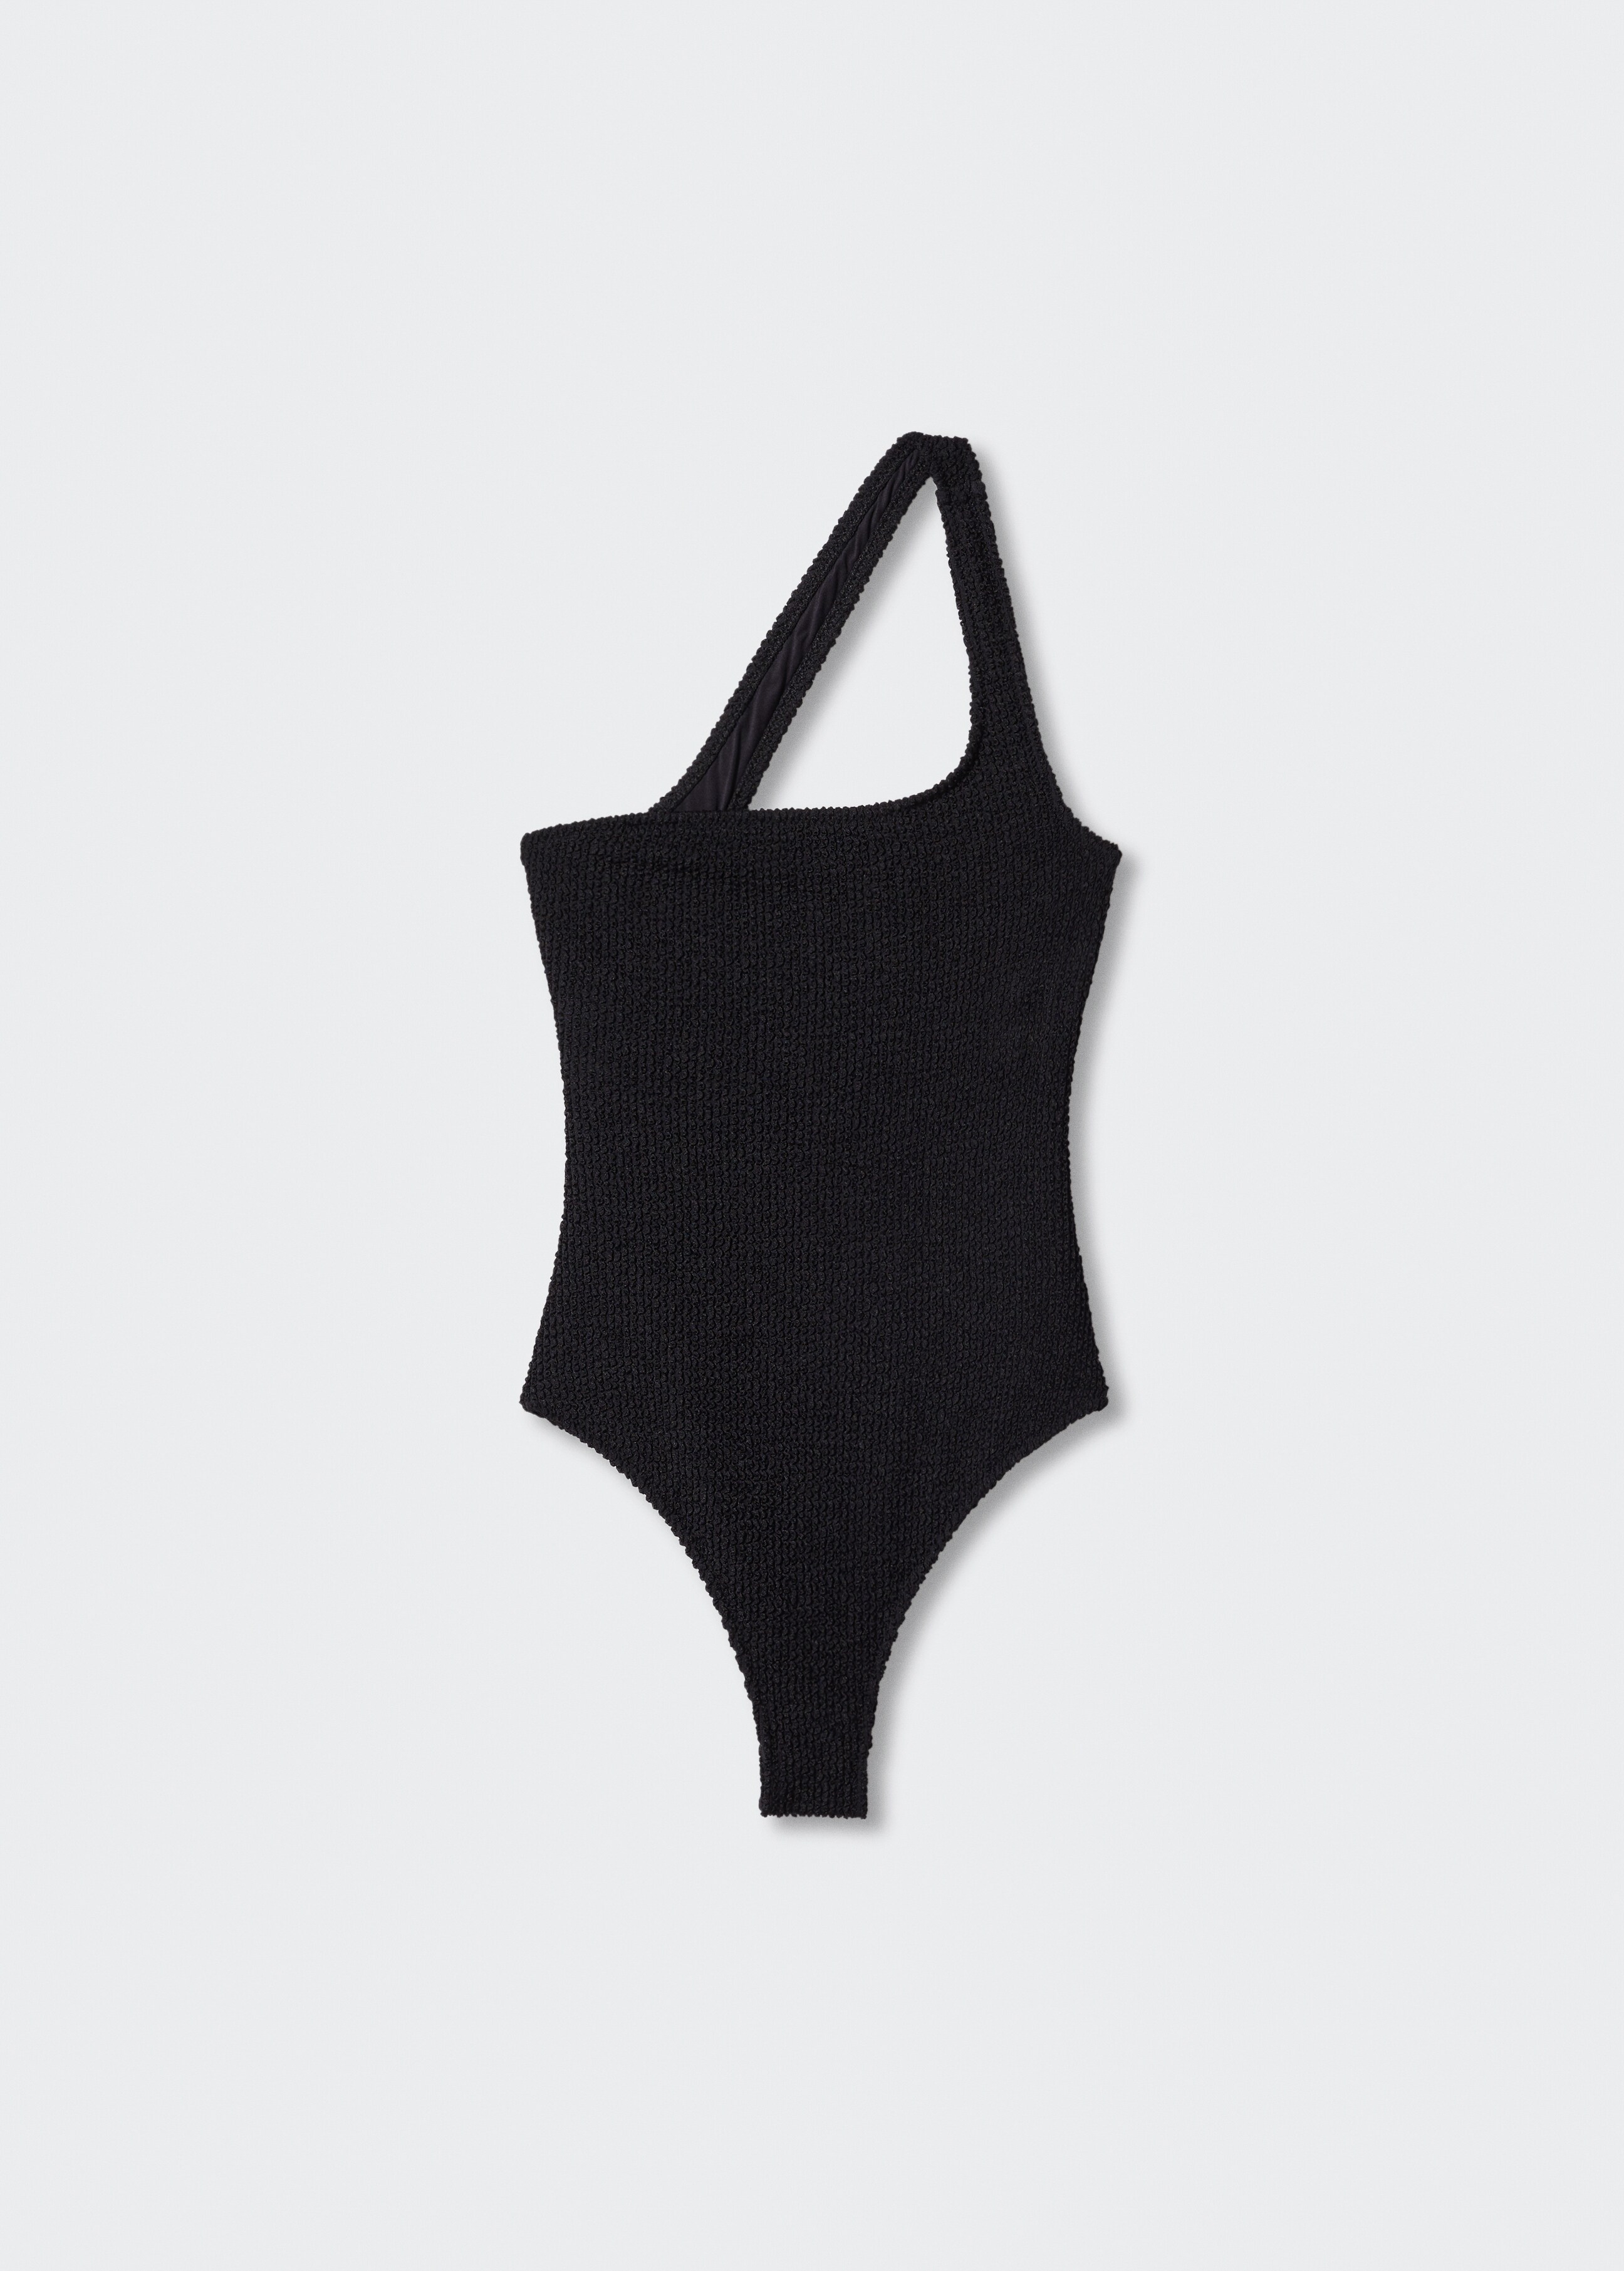 Asymmetrical swimsuit with wide straps - Article without model